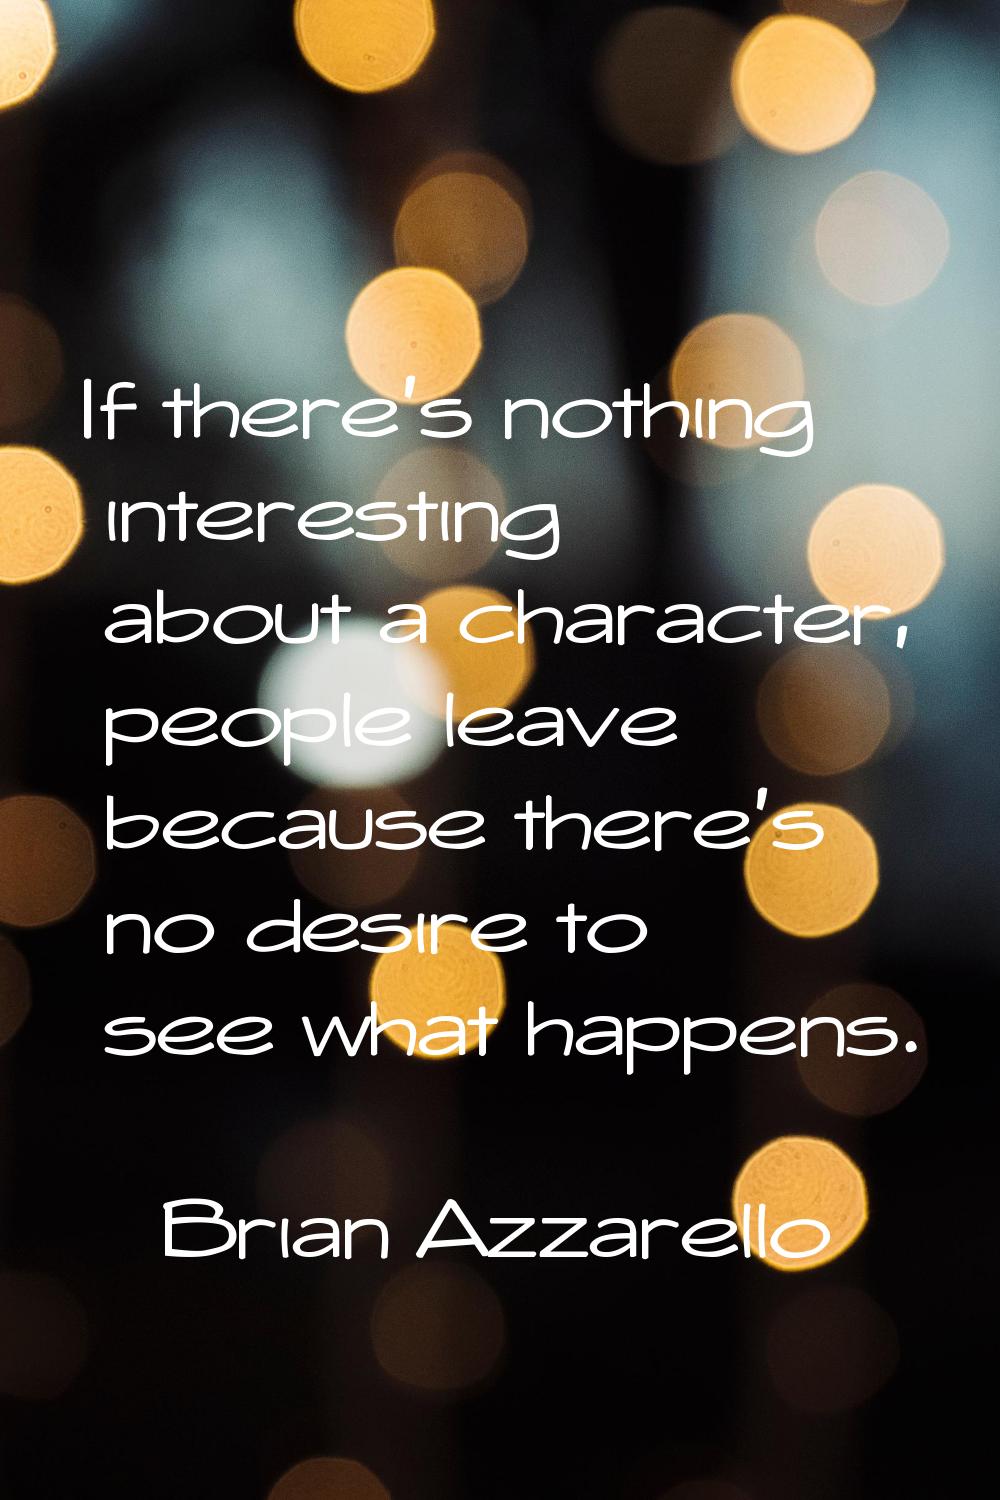 If there's nothing interesting about a character, people leave because there's no desire to see wha